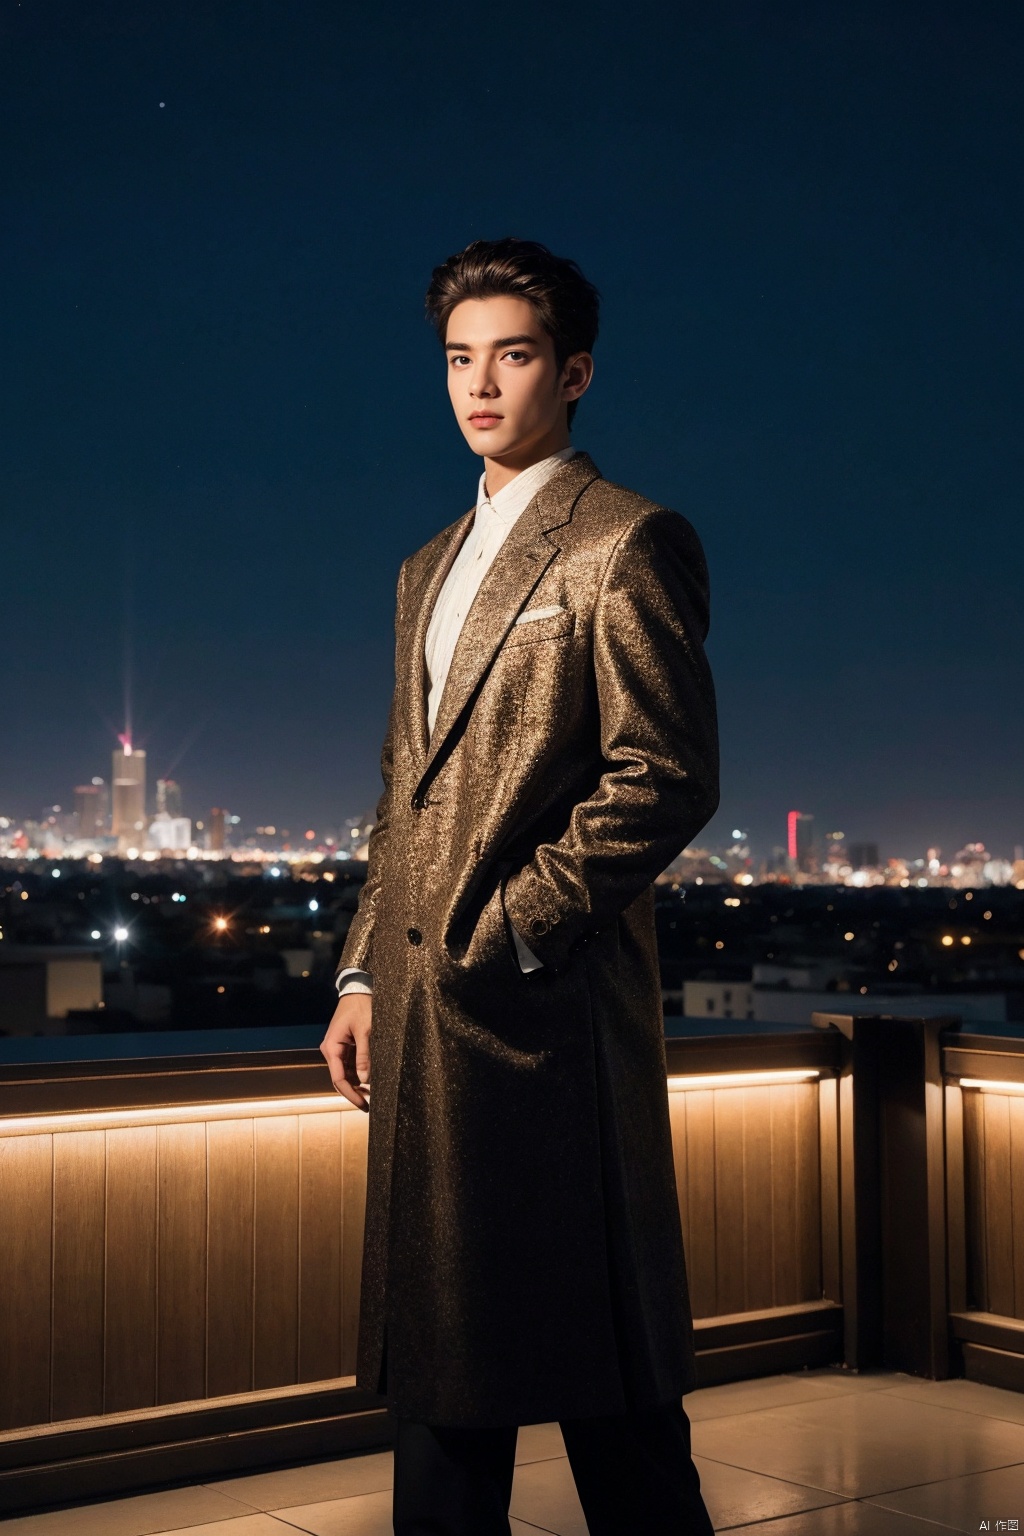 nighttime rooftop couture, 35mm panoramic snapshot, fashion-forward male model standing tall on a dimly lit rooftop under the starry night sky, full-length composition exuding urban sophistication, dressed in a statement ensemble from the latest menswear collections, posing confidently against the glittering skyline backdrop, leveraging the ambient city glow and moonlight to enhance the visual impact of the outfit, ACDEFZ_rooftop_elegance, high-resolution imagery, adept use of long exposure to capture the vibrancy of the city below while retaining crisp focus on the subject, creating a captivating narrative that merges the nocturnal allure of the urban landscape with the cutting-edge style of a modern man,((poakl)), monkren